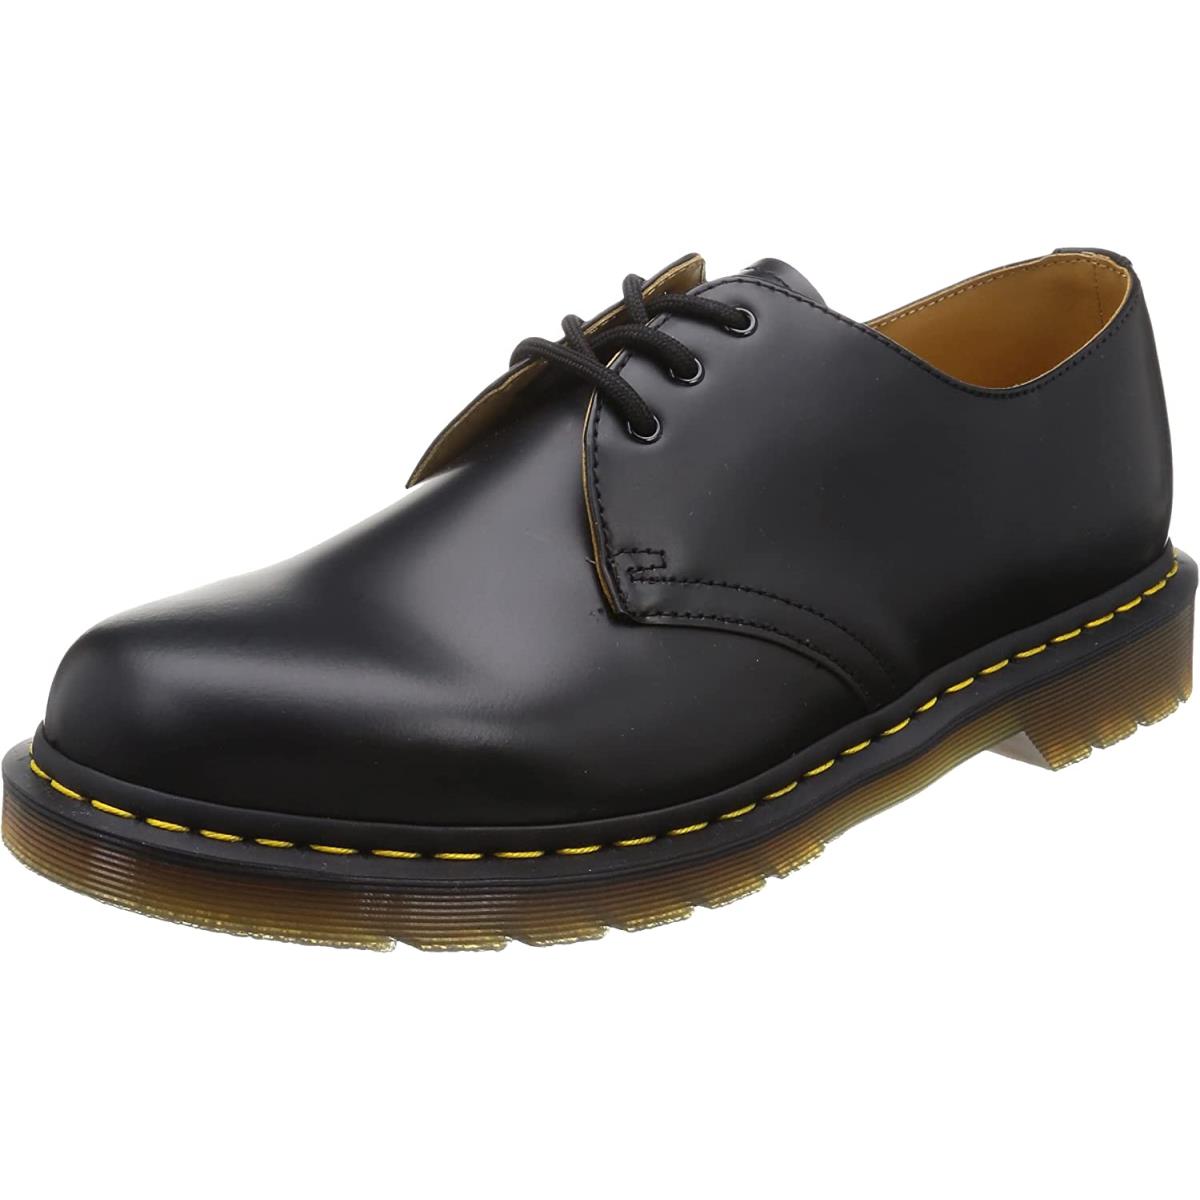 Dr. Martens 1461 3-Eye Leather Oxford Shoe For Men and Women Black Smooth